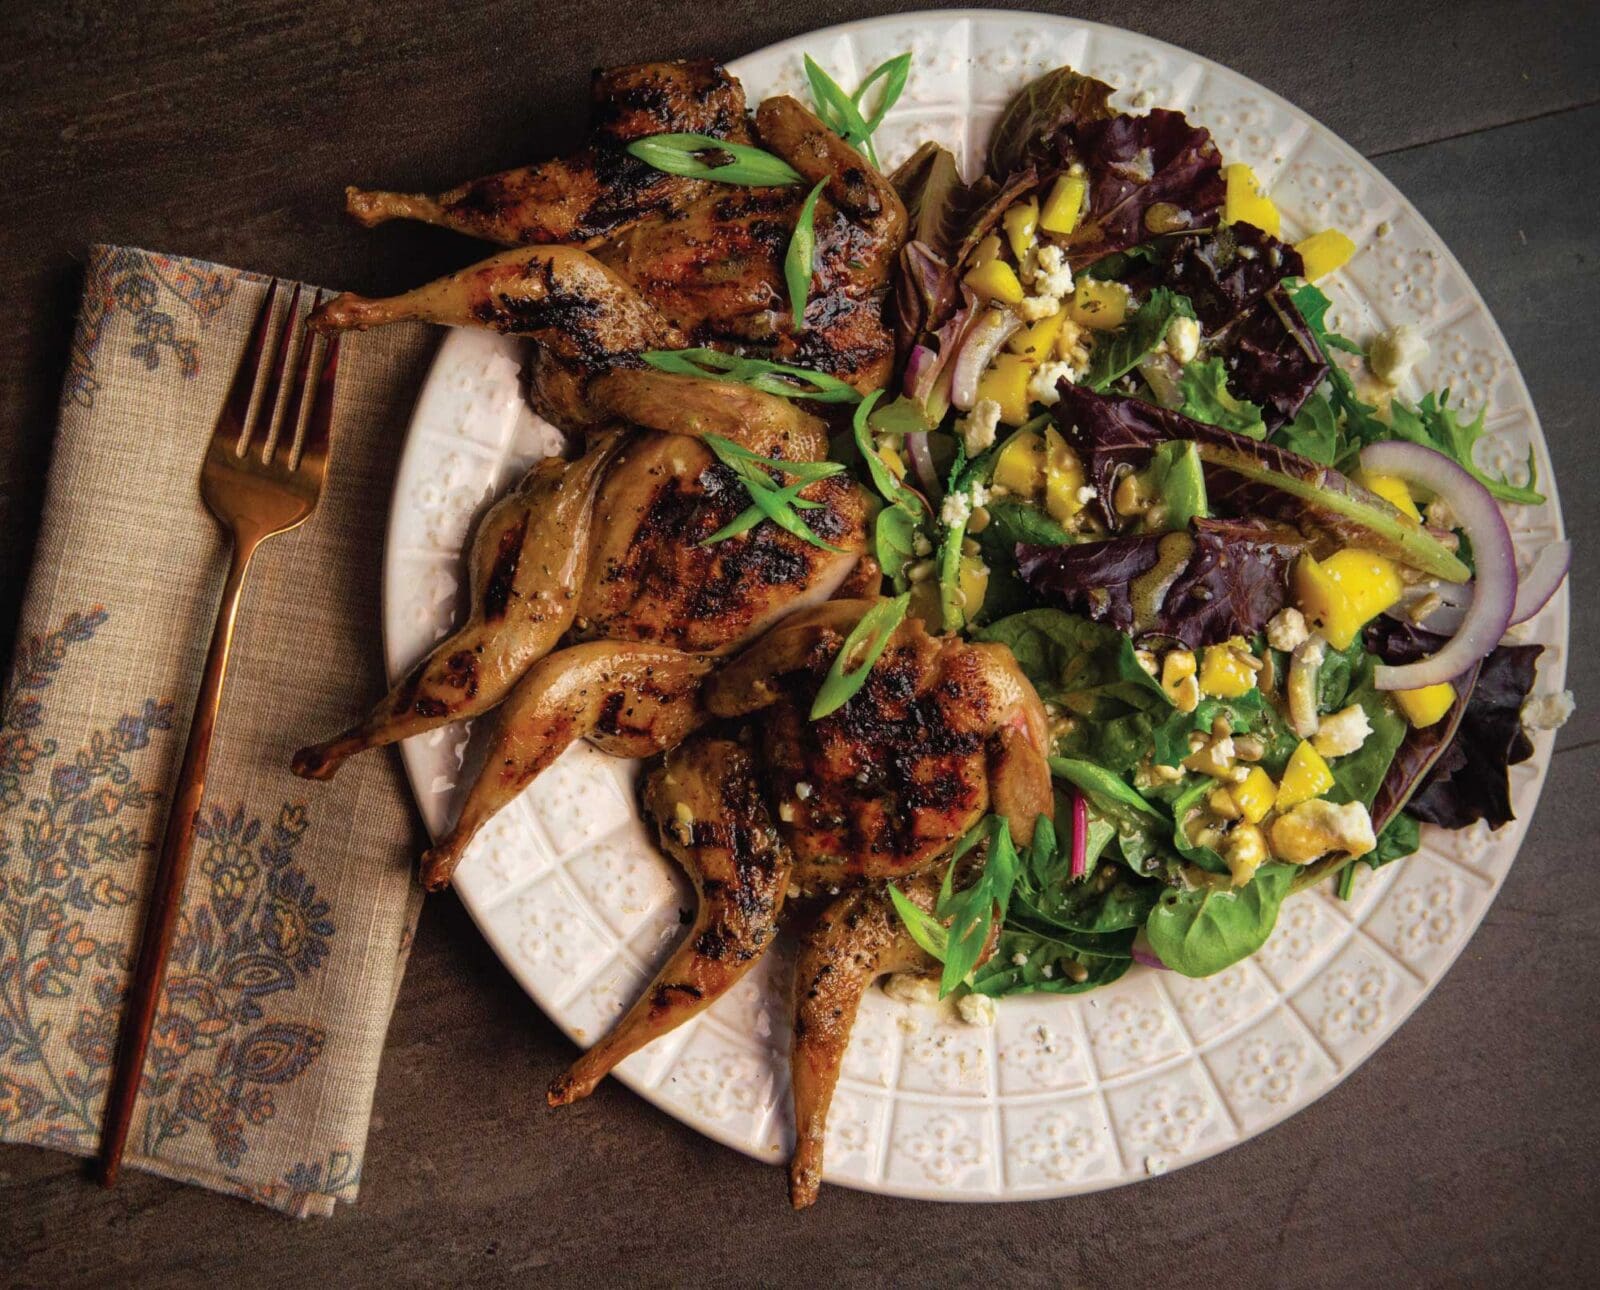 Grilled quail on a plate with salad.